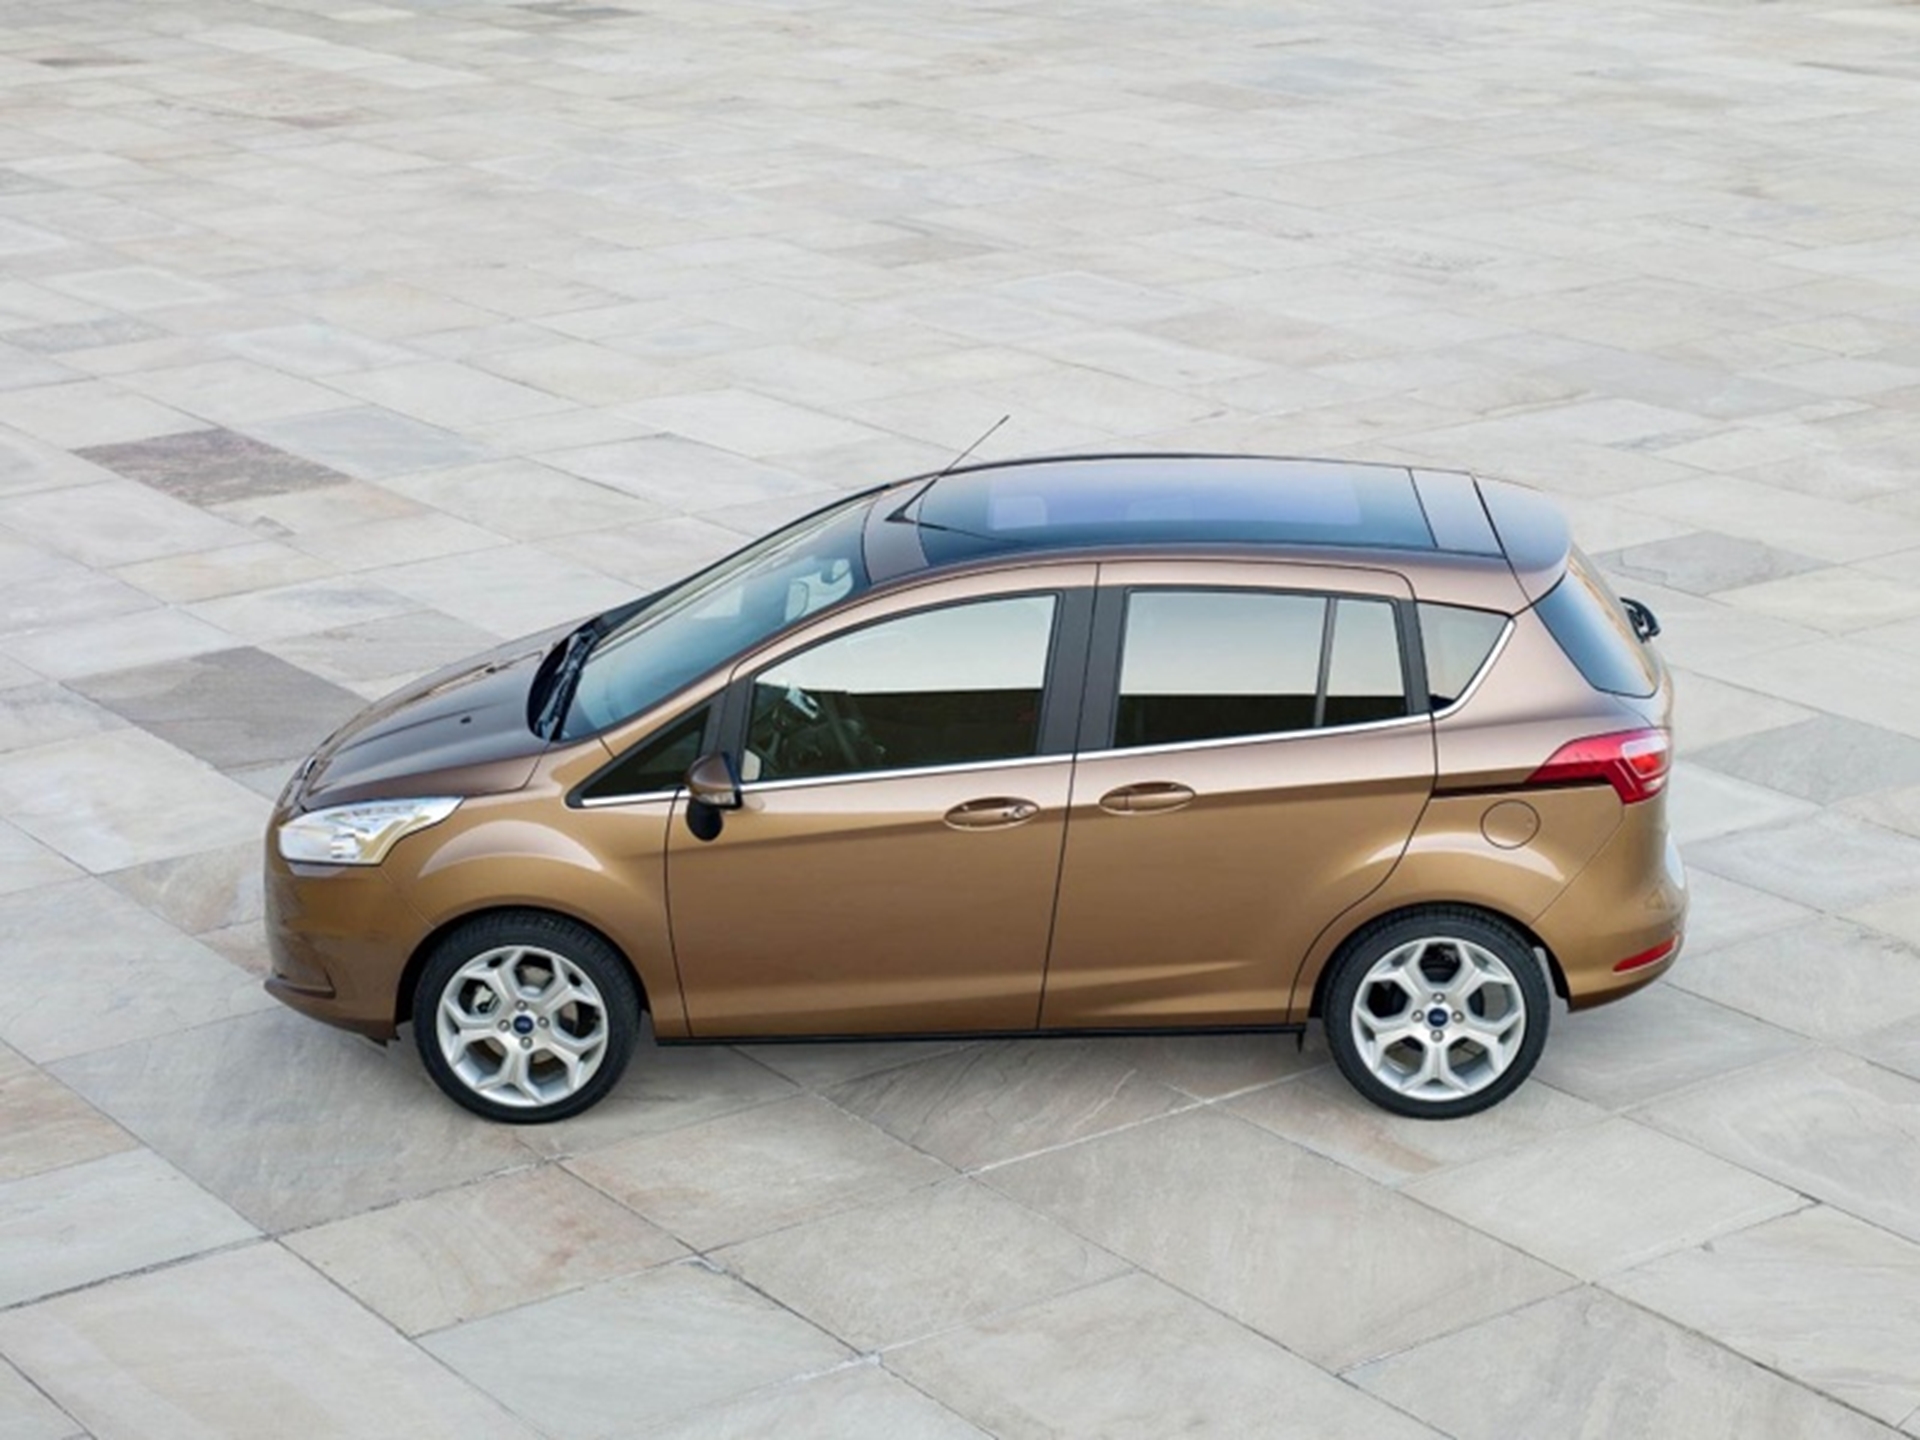 Prices Announced for Ford’s Ingenious New B-Max Small Car